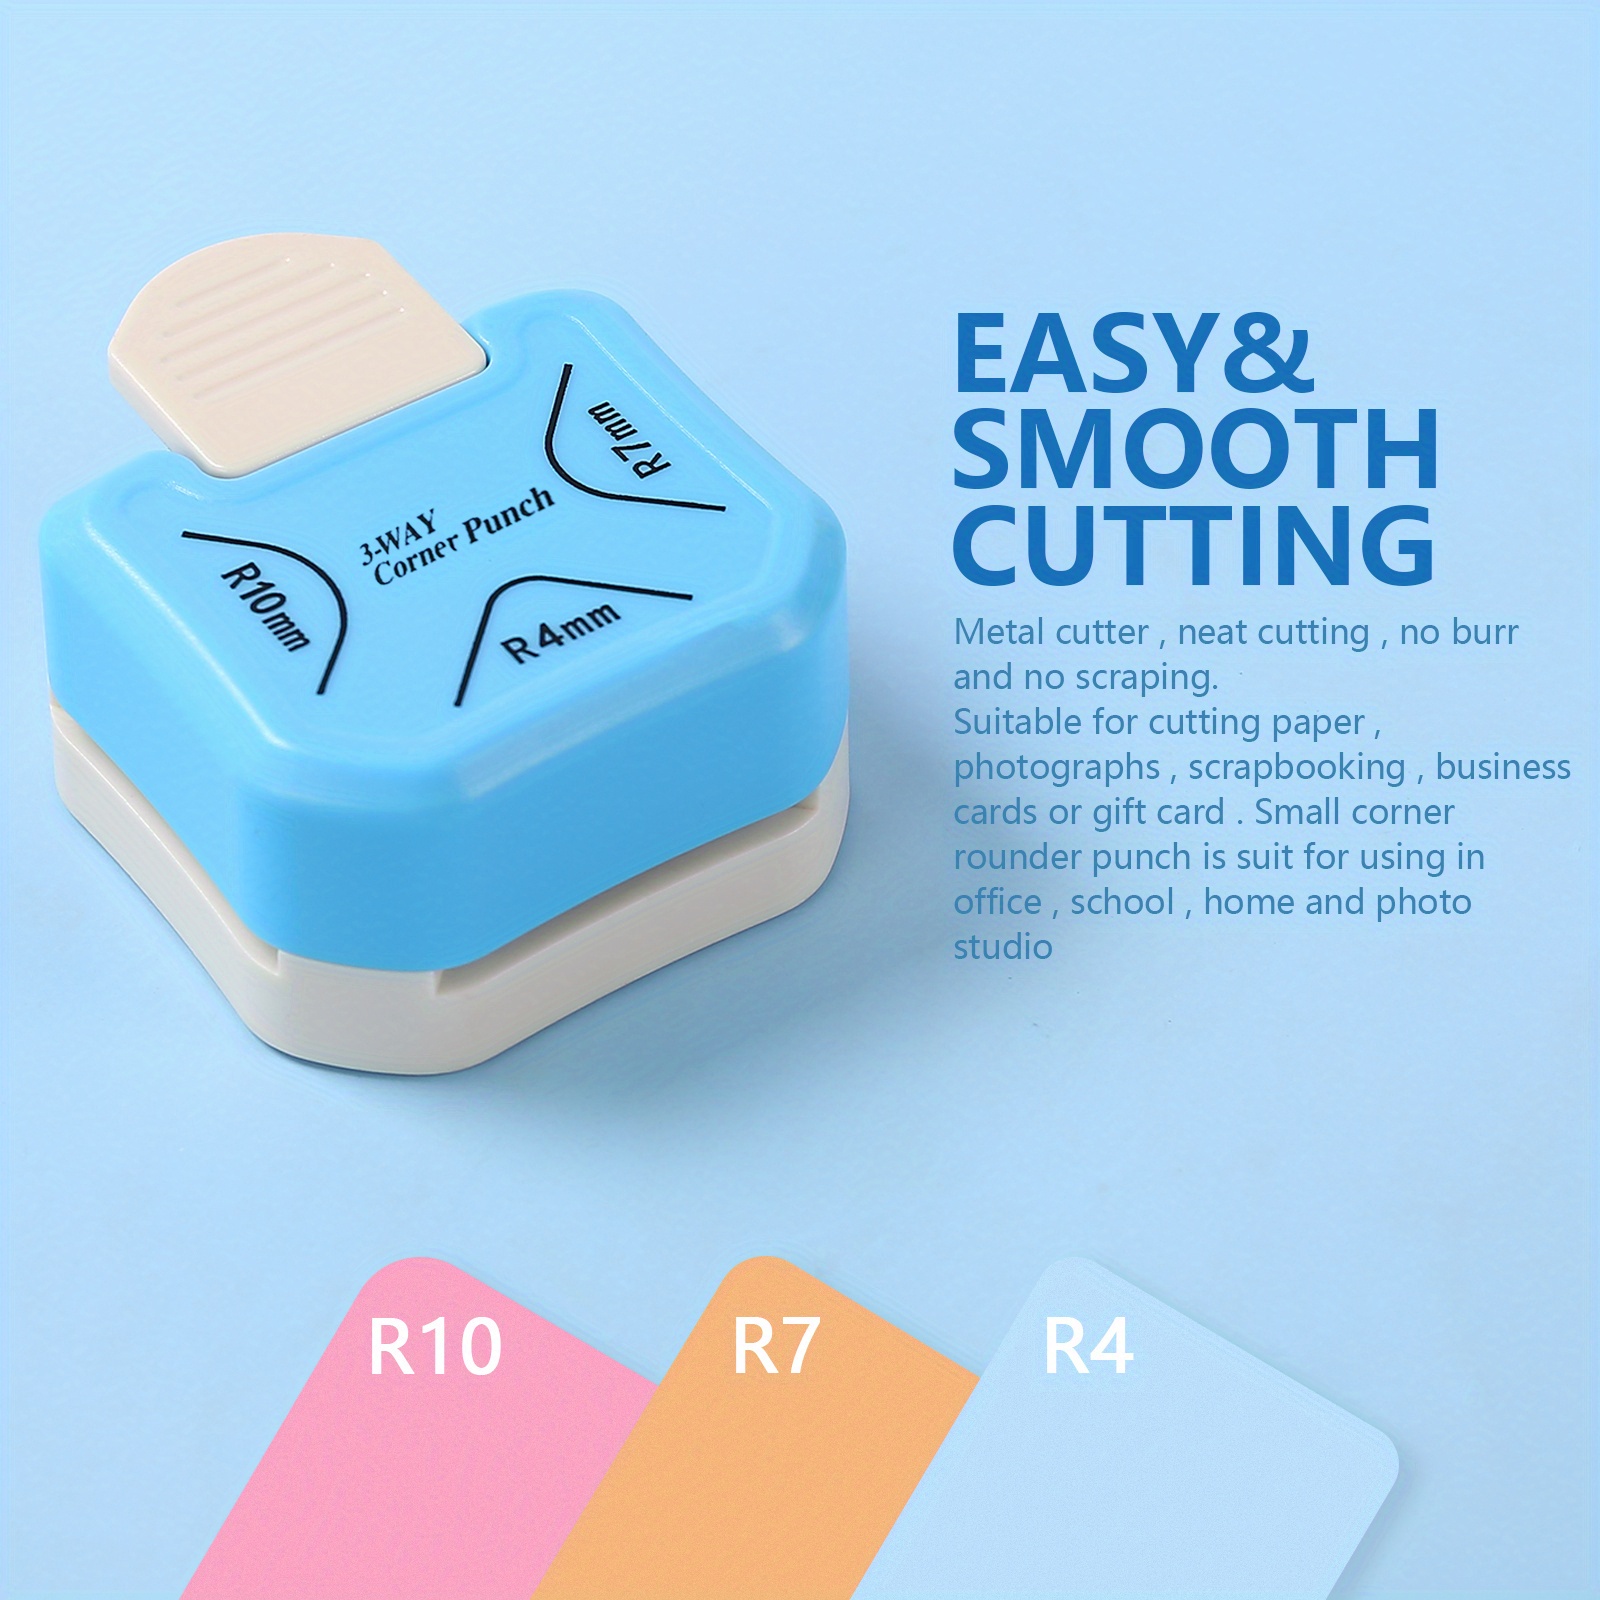 Dengmore 3 Way Beauty Shape Corner Punch 3 In 1 Corner Paper Punch For  Paper Crafts Laminate Cardstock Business Card DIY Projects Photo Card  Making 